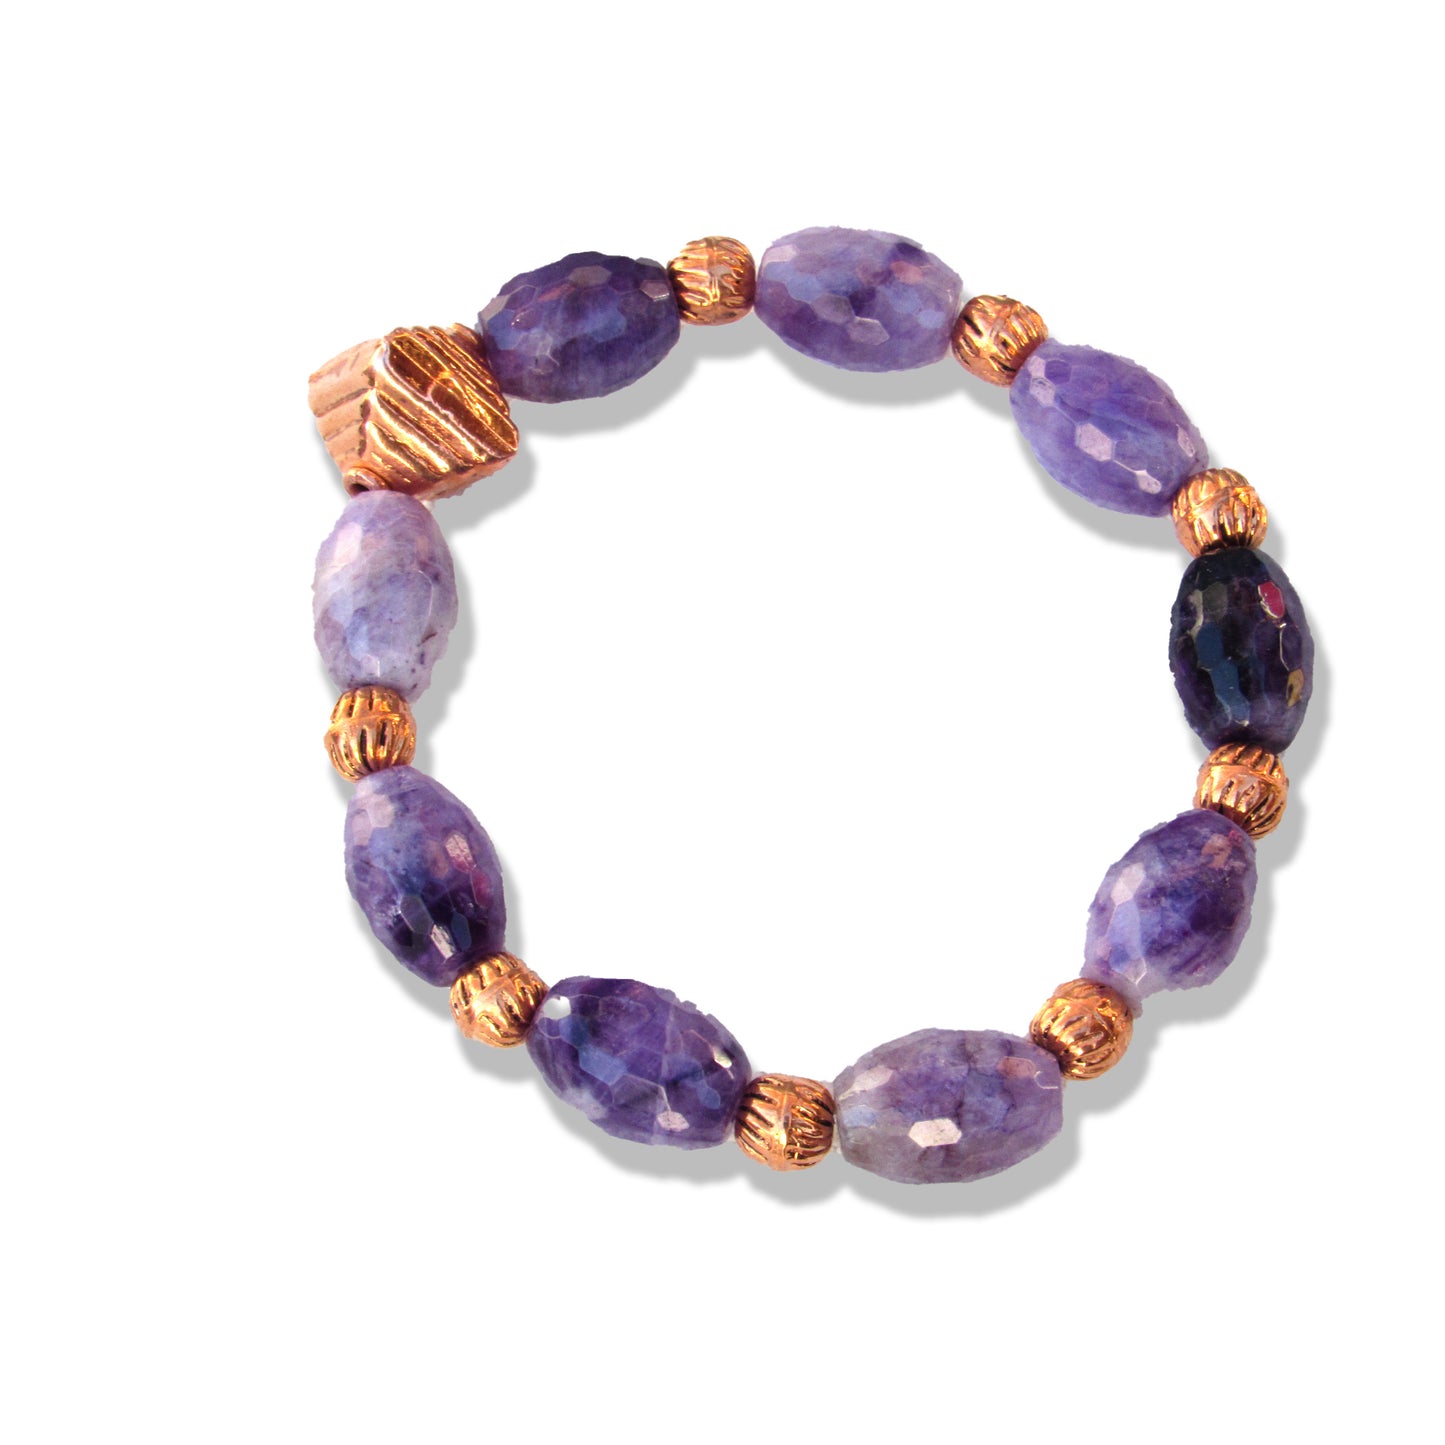 Copper and Charoite Beaded Stretch Bracelet